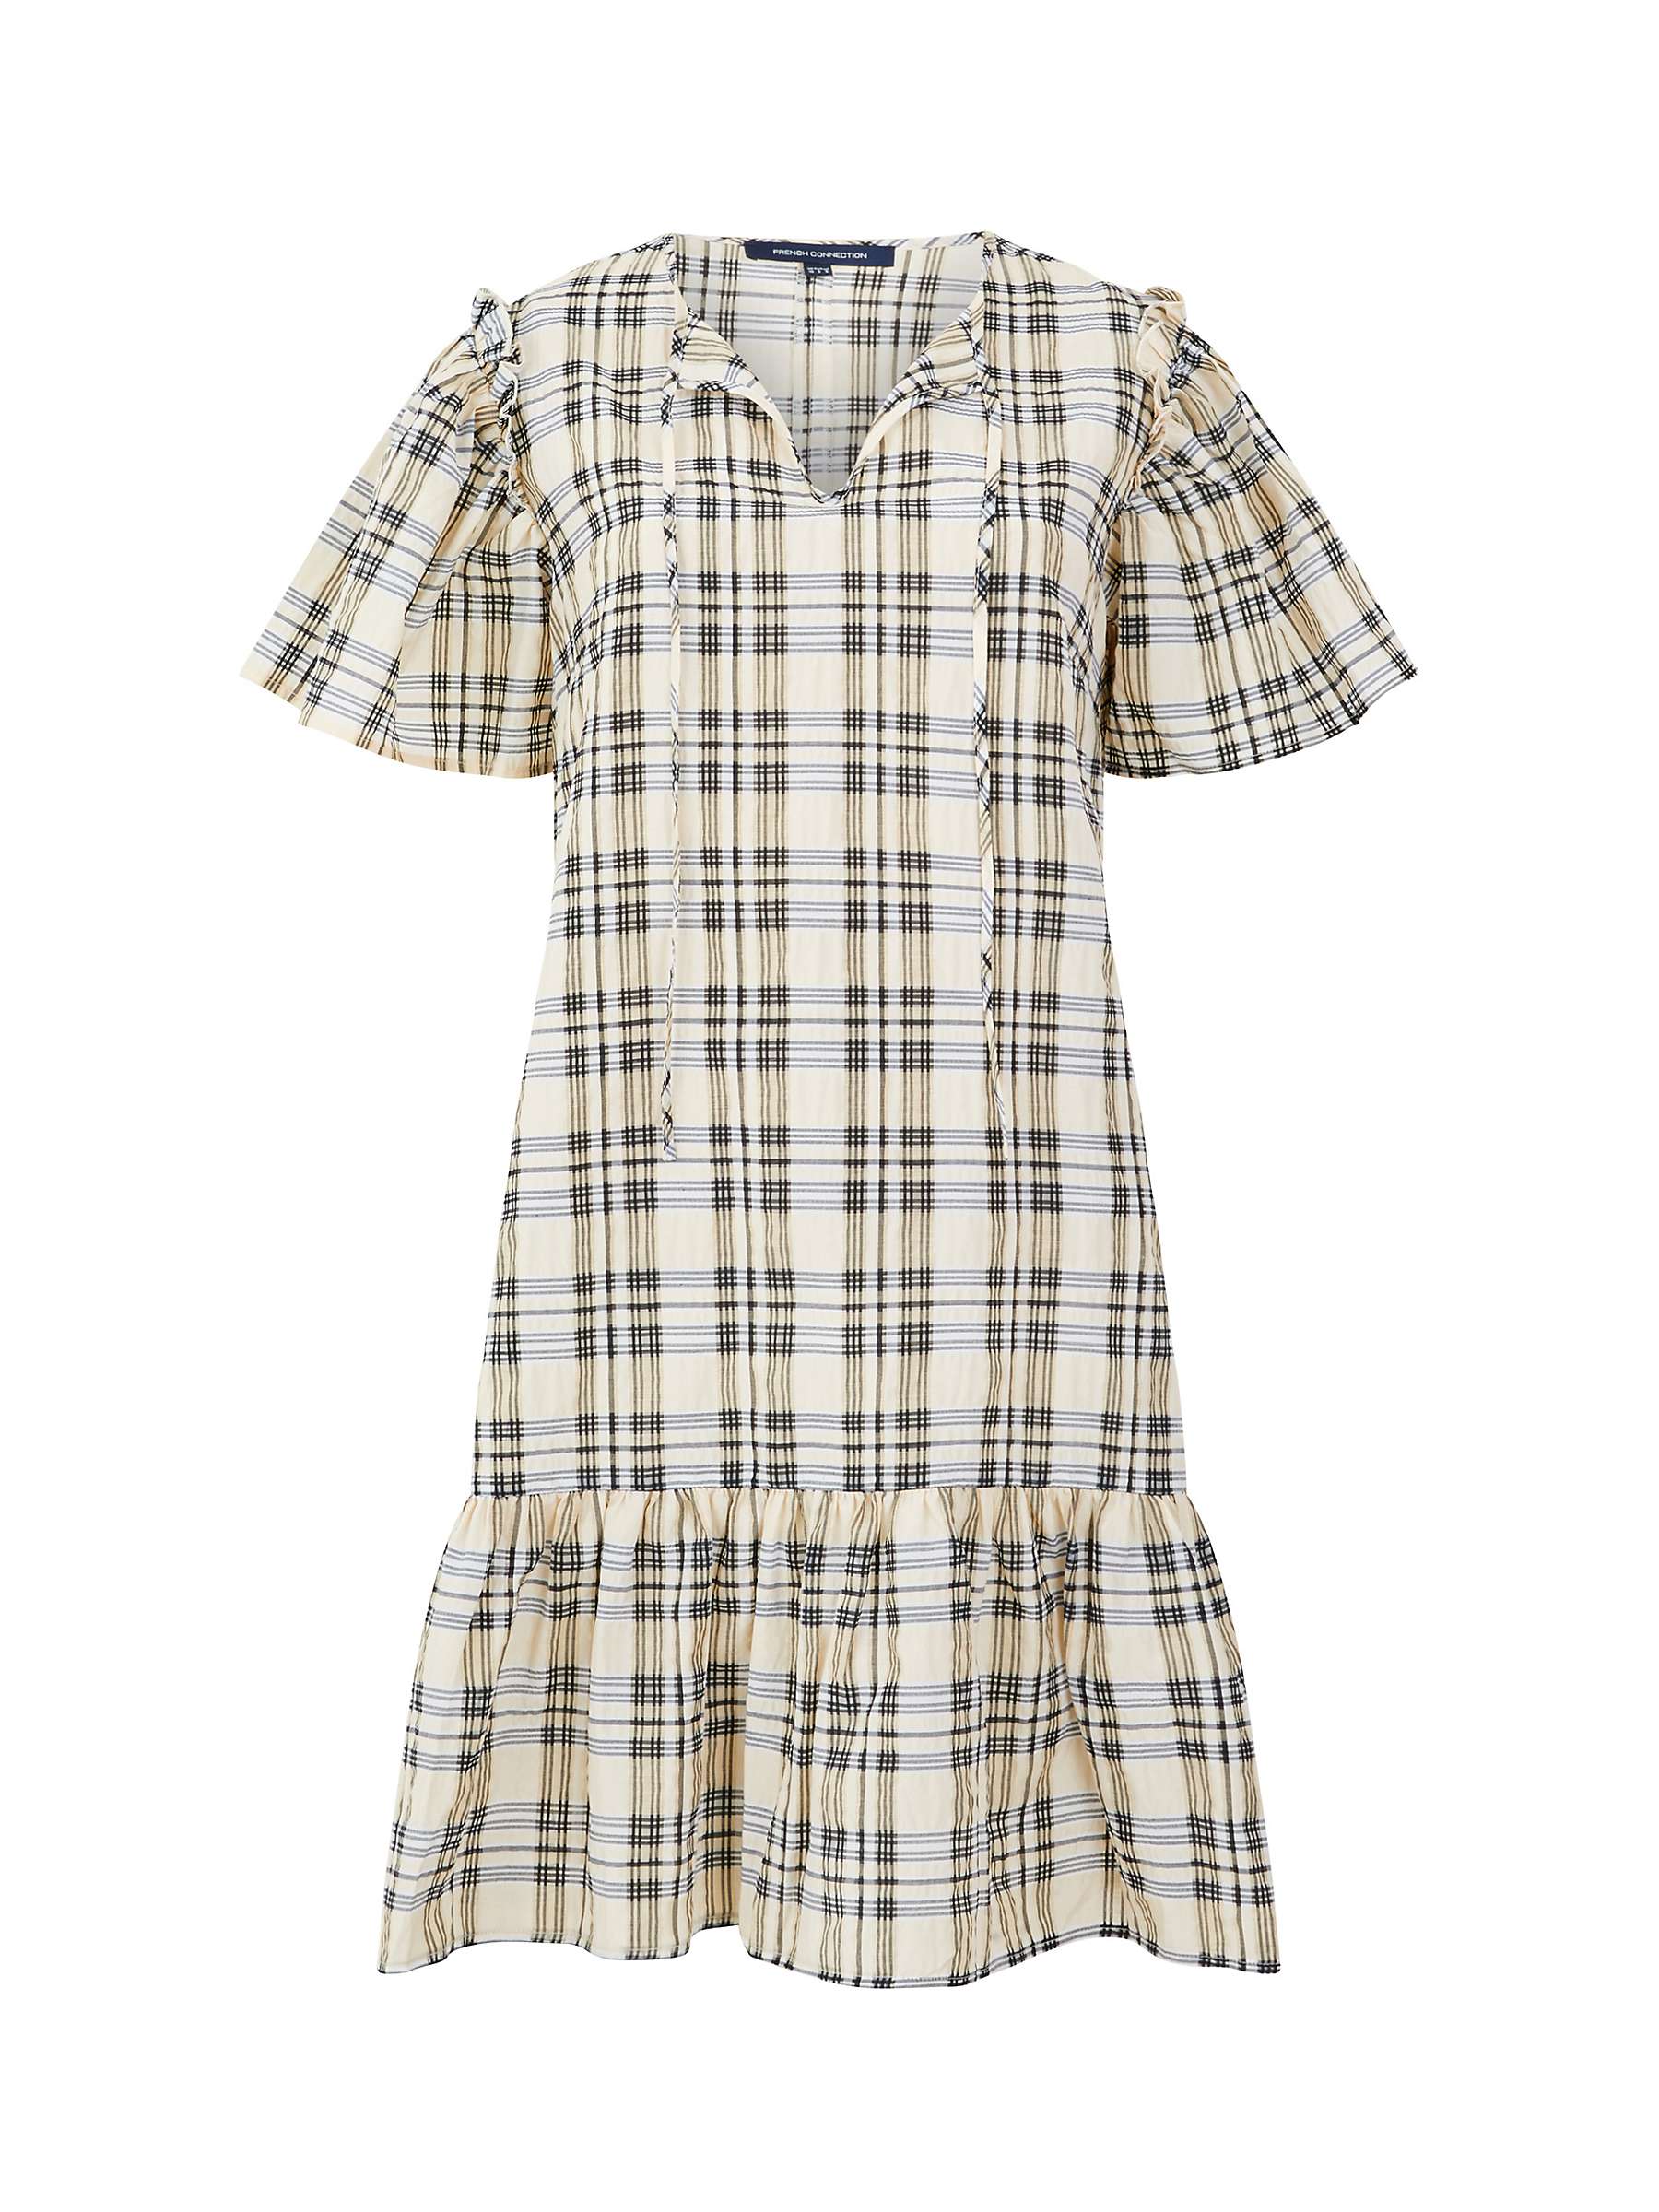 Buy French Connection Ivy Mini Check Dress, Black Ash/Classic Cream Online at johnlewis.com